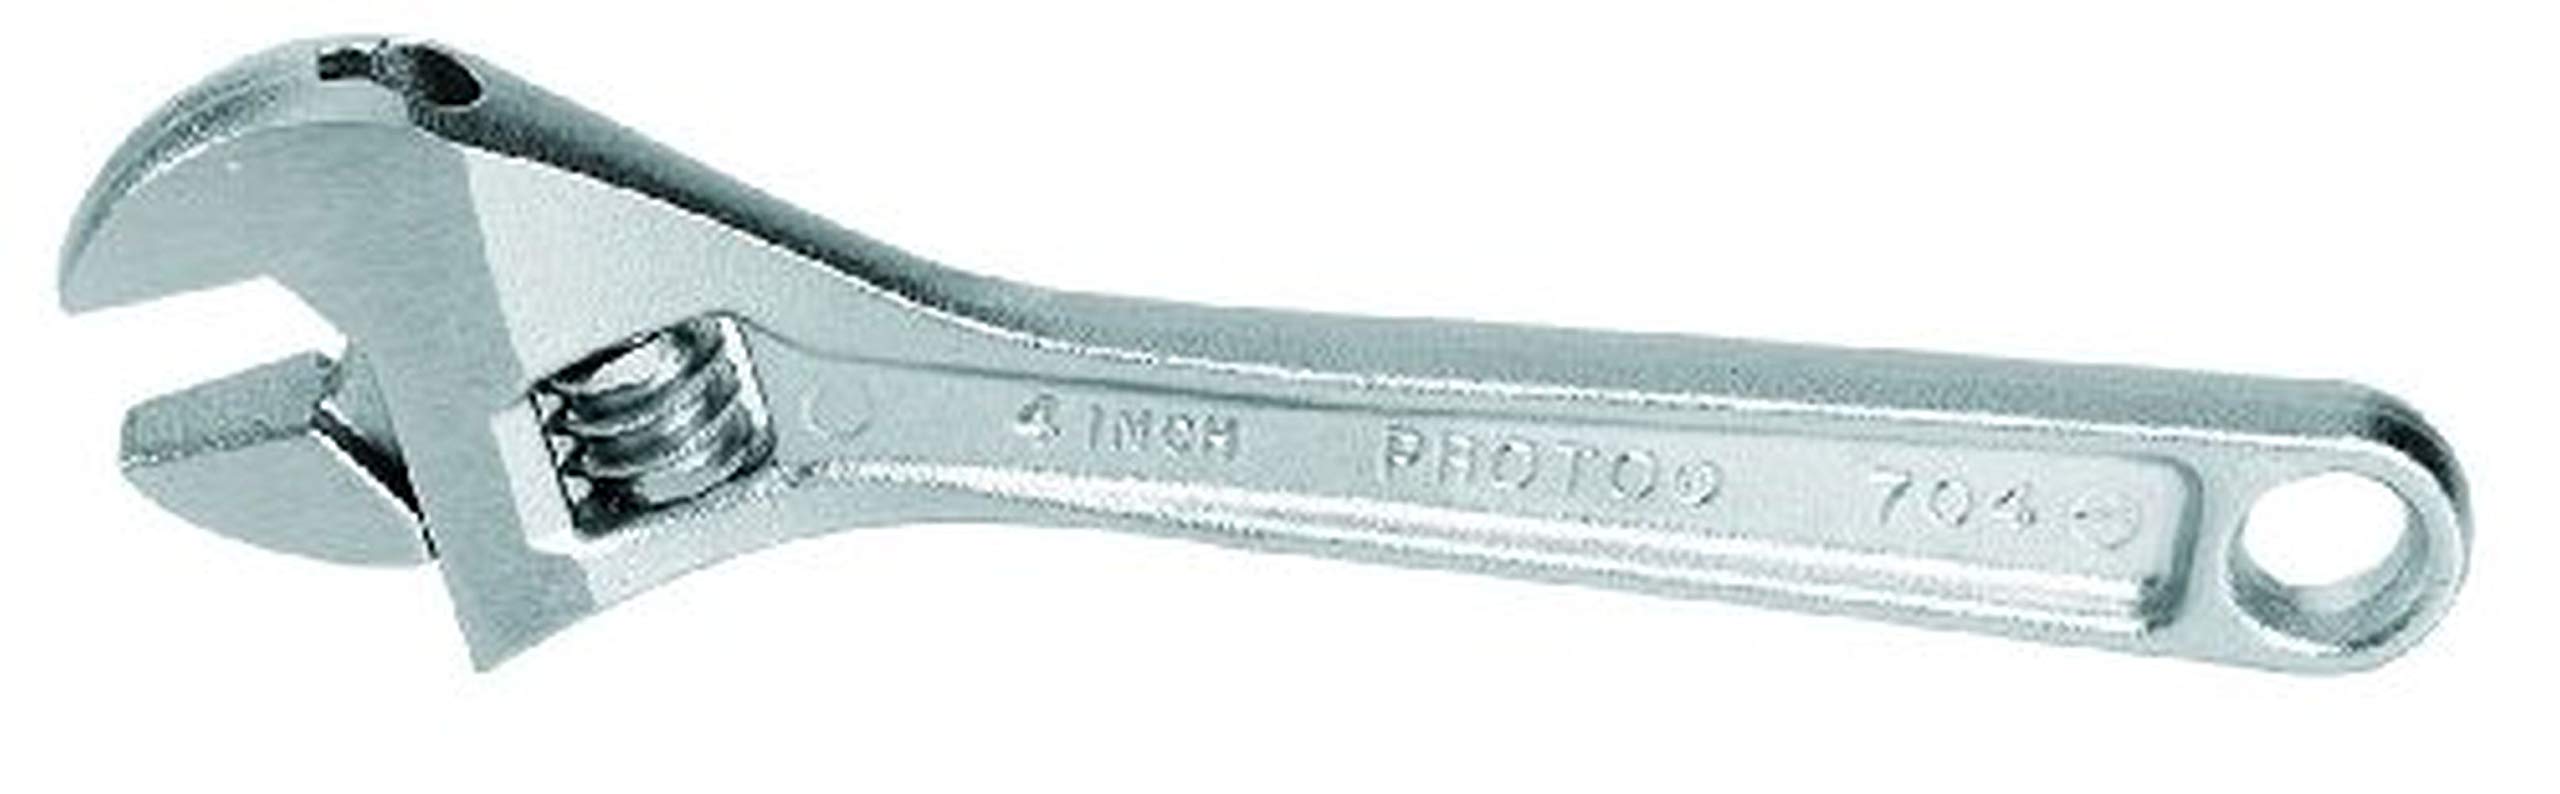 8" Proto Satin Adjustable Wrench (J708) $5.08 + Free Shipping w/ Prime or on $35+